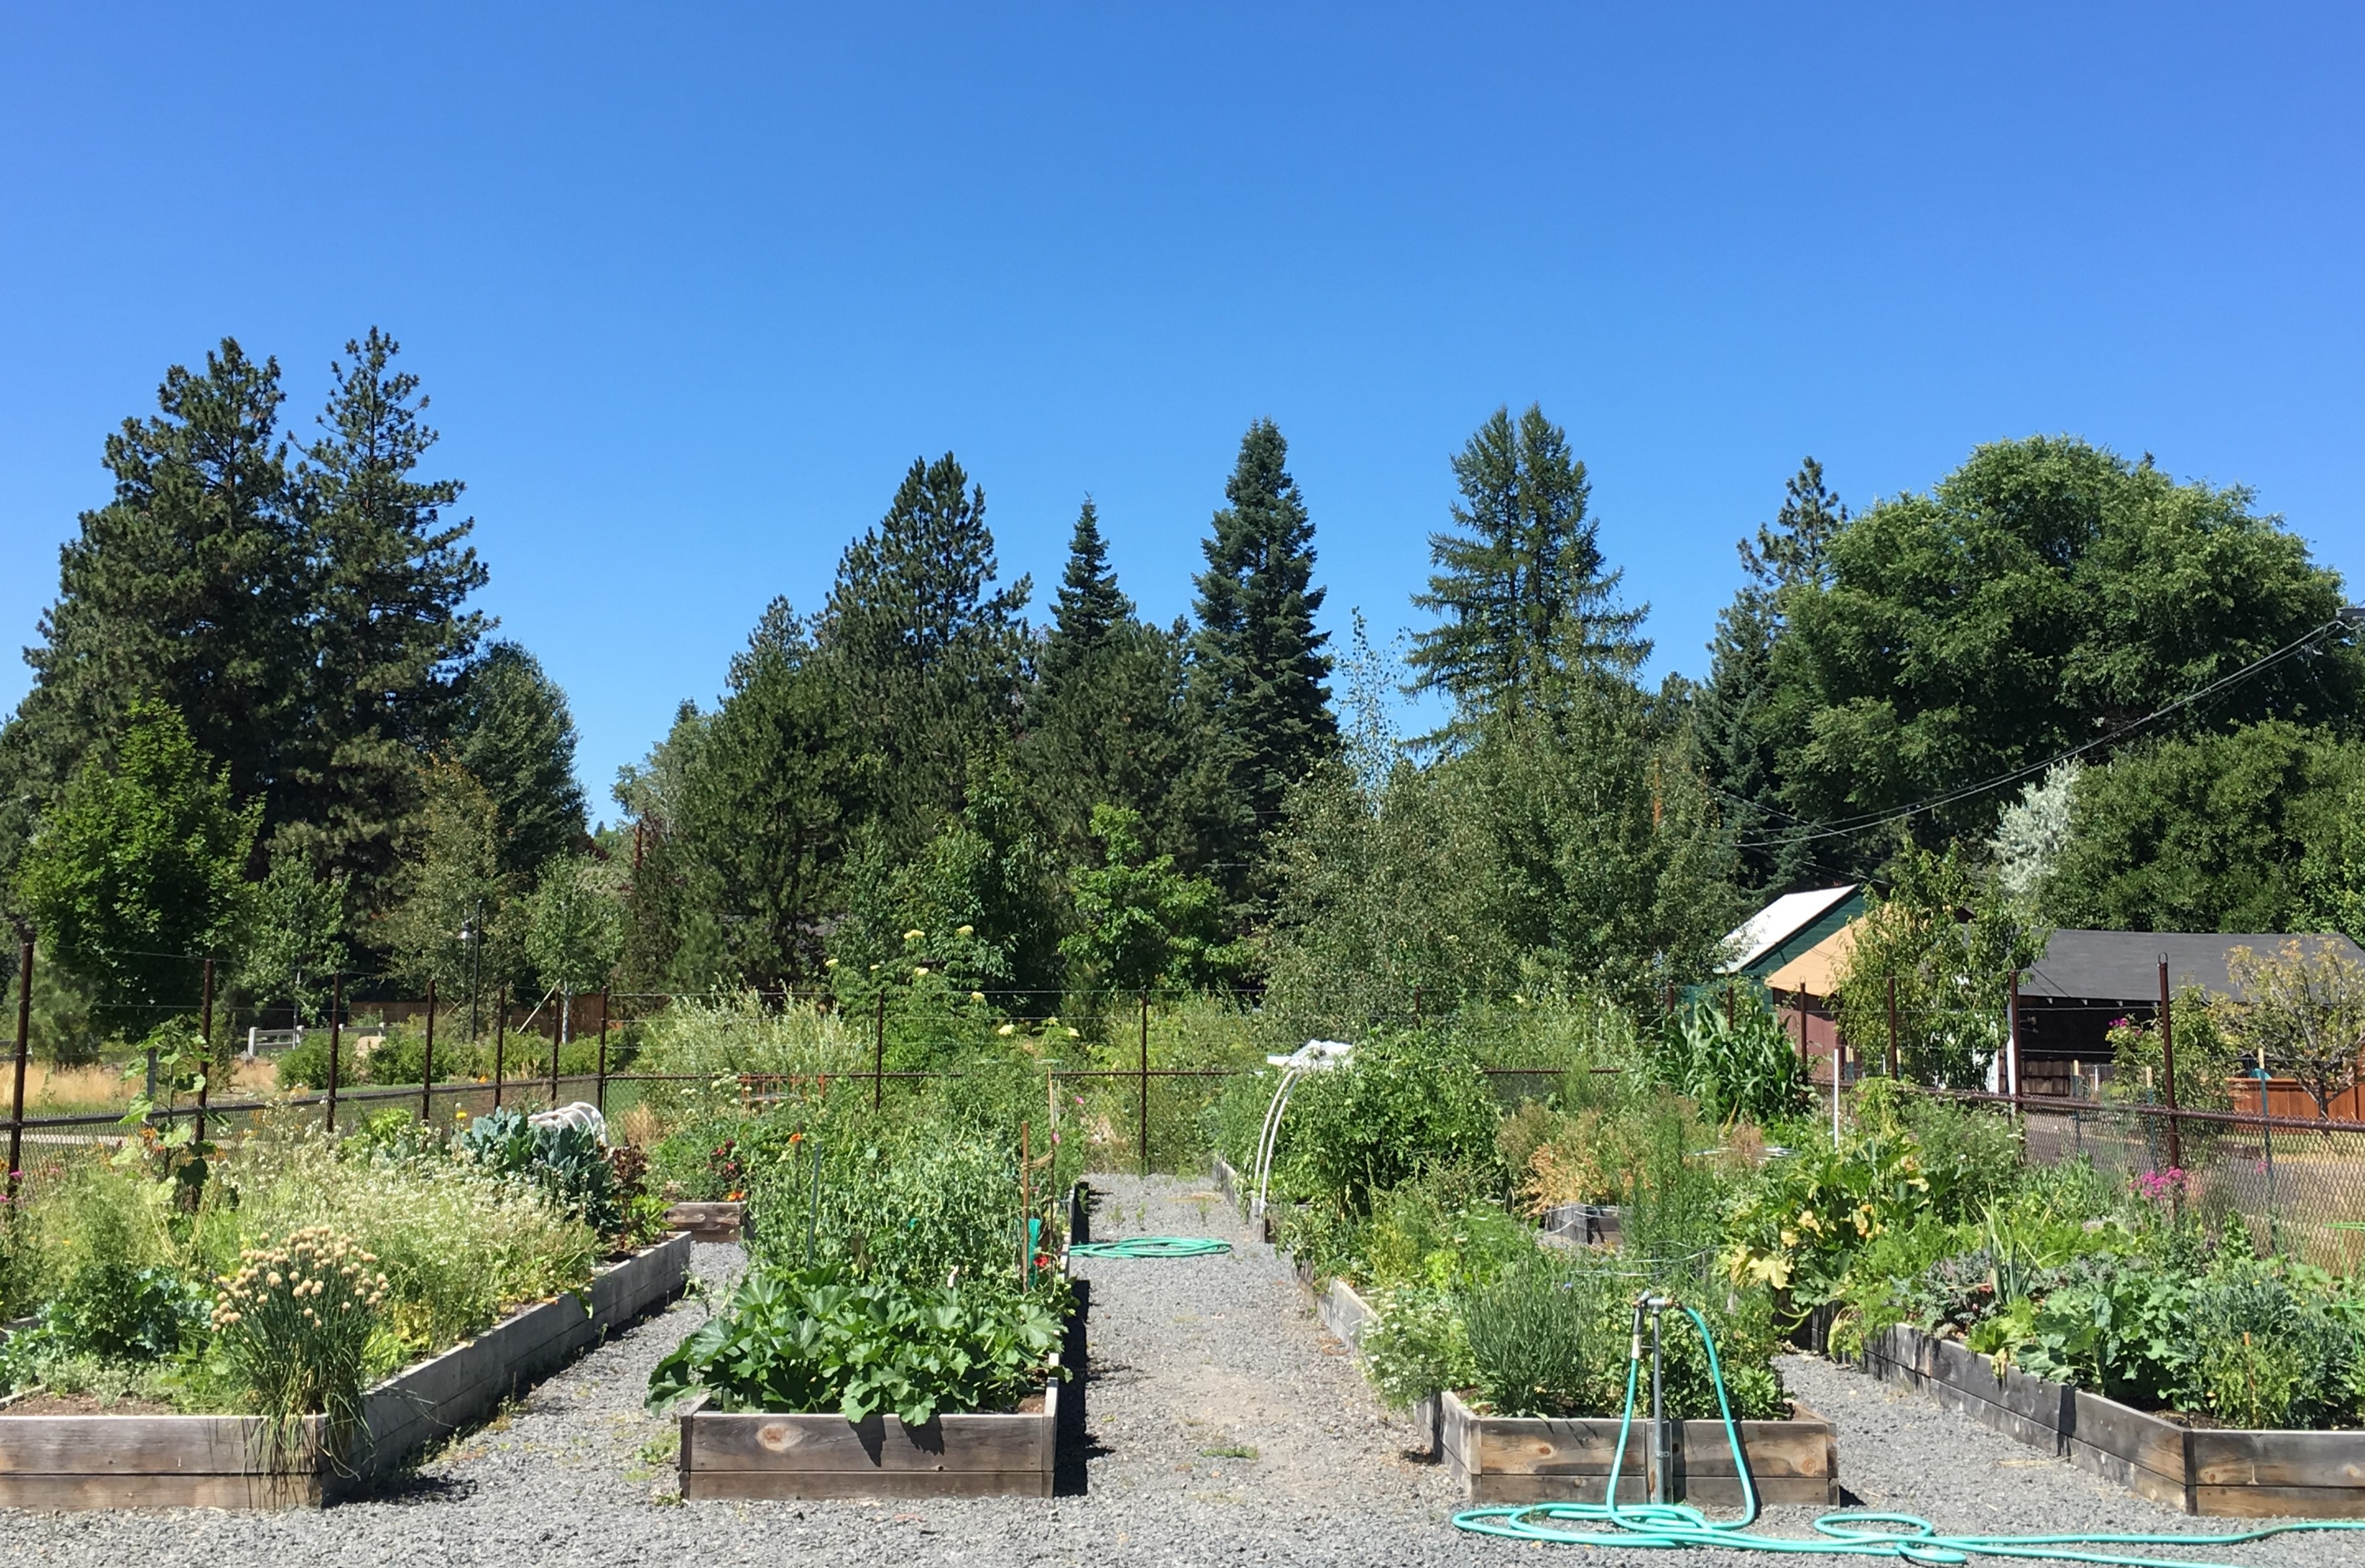 the community garden at millers landing